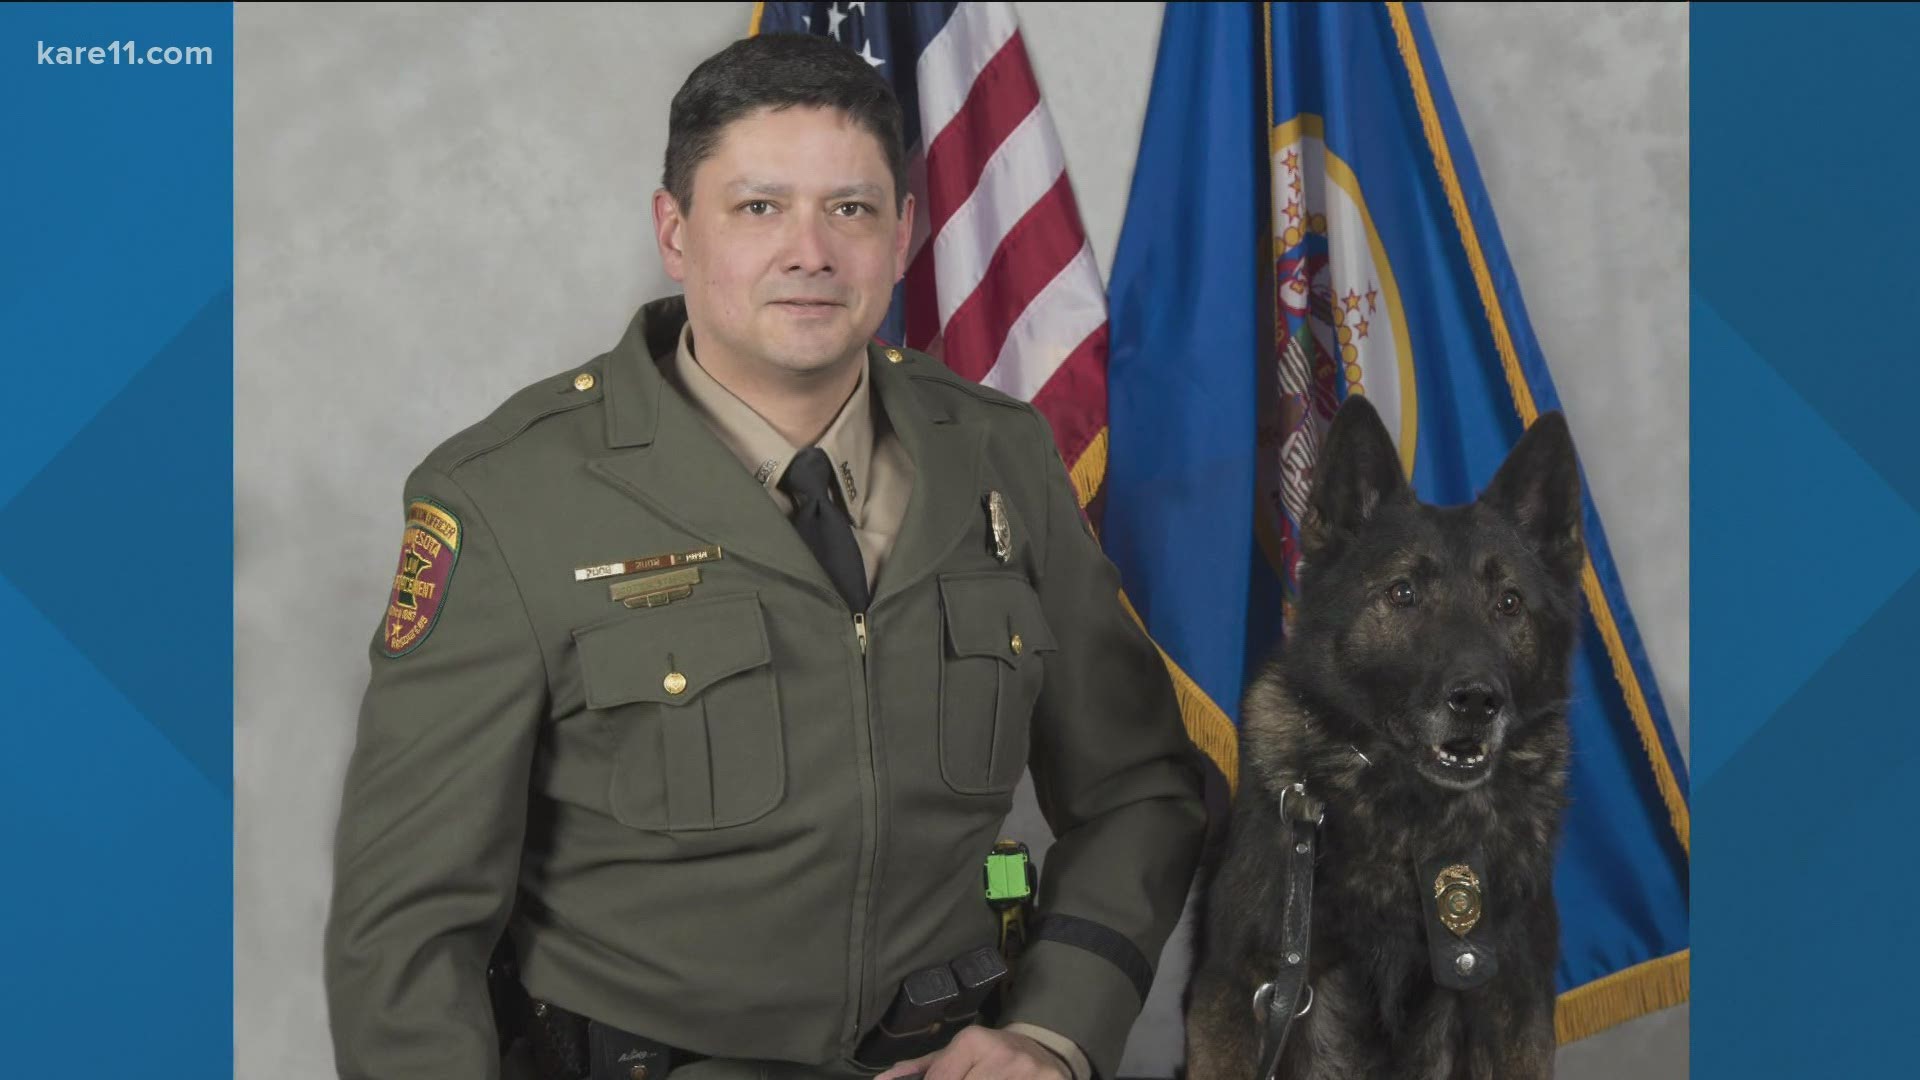 The start of a new year marks the end of a career for a DNR K9 officer named Schody. The German Shepherd is retiring after ten years on the job